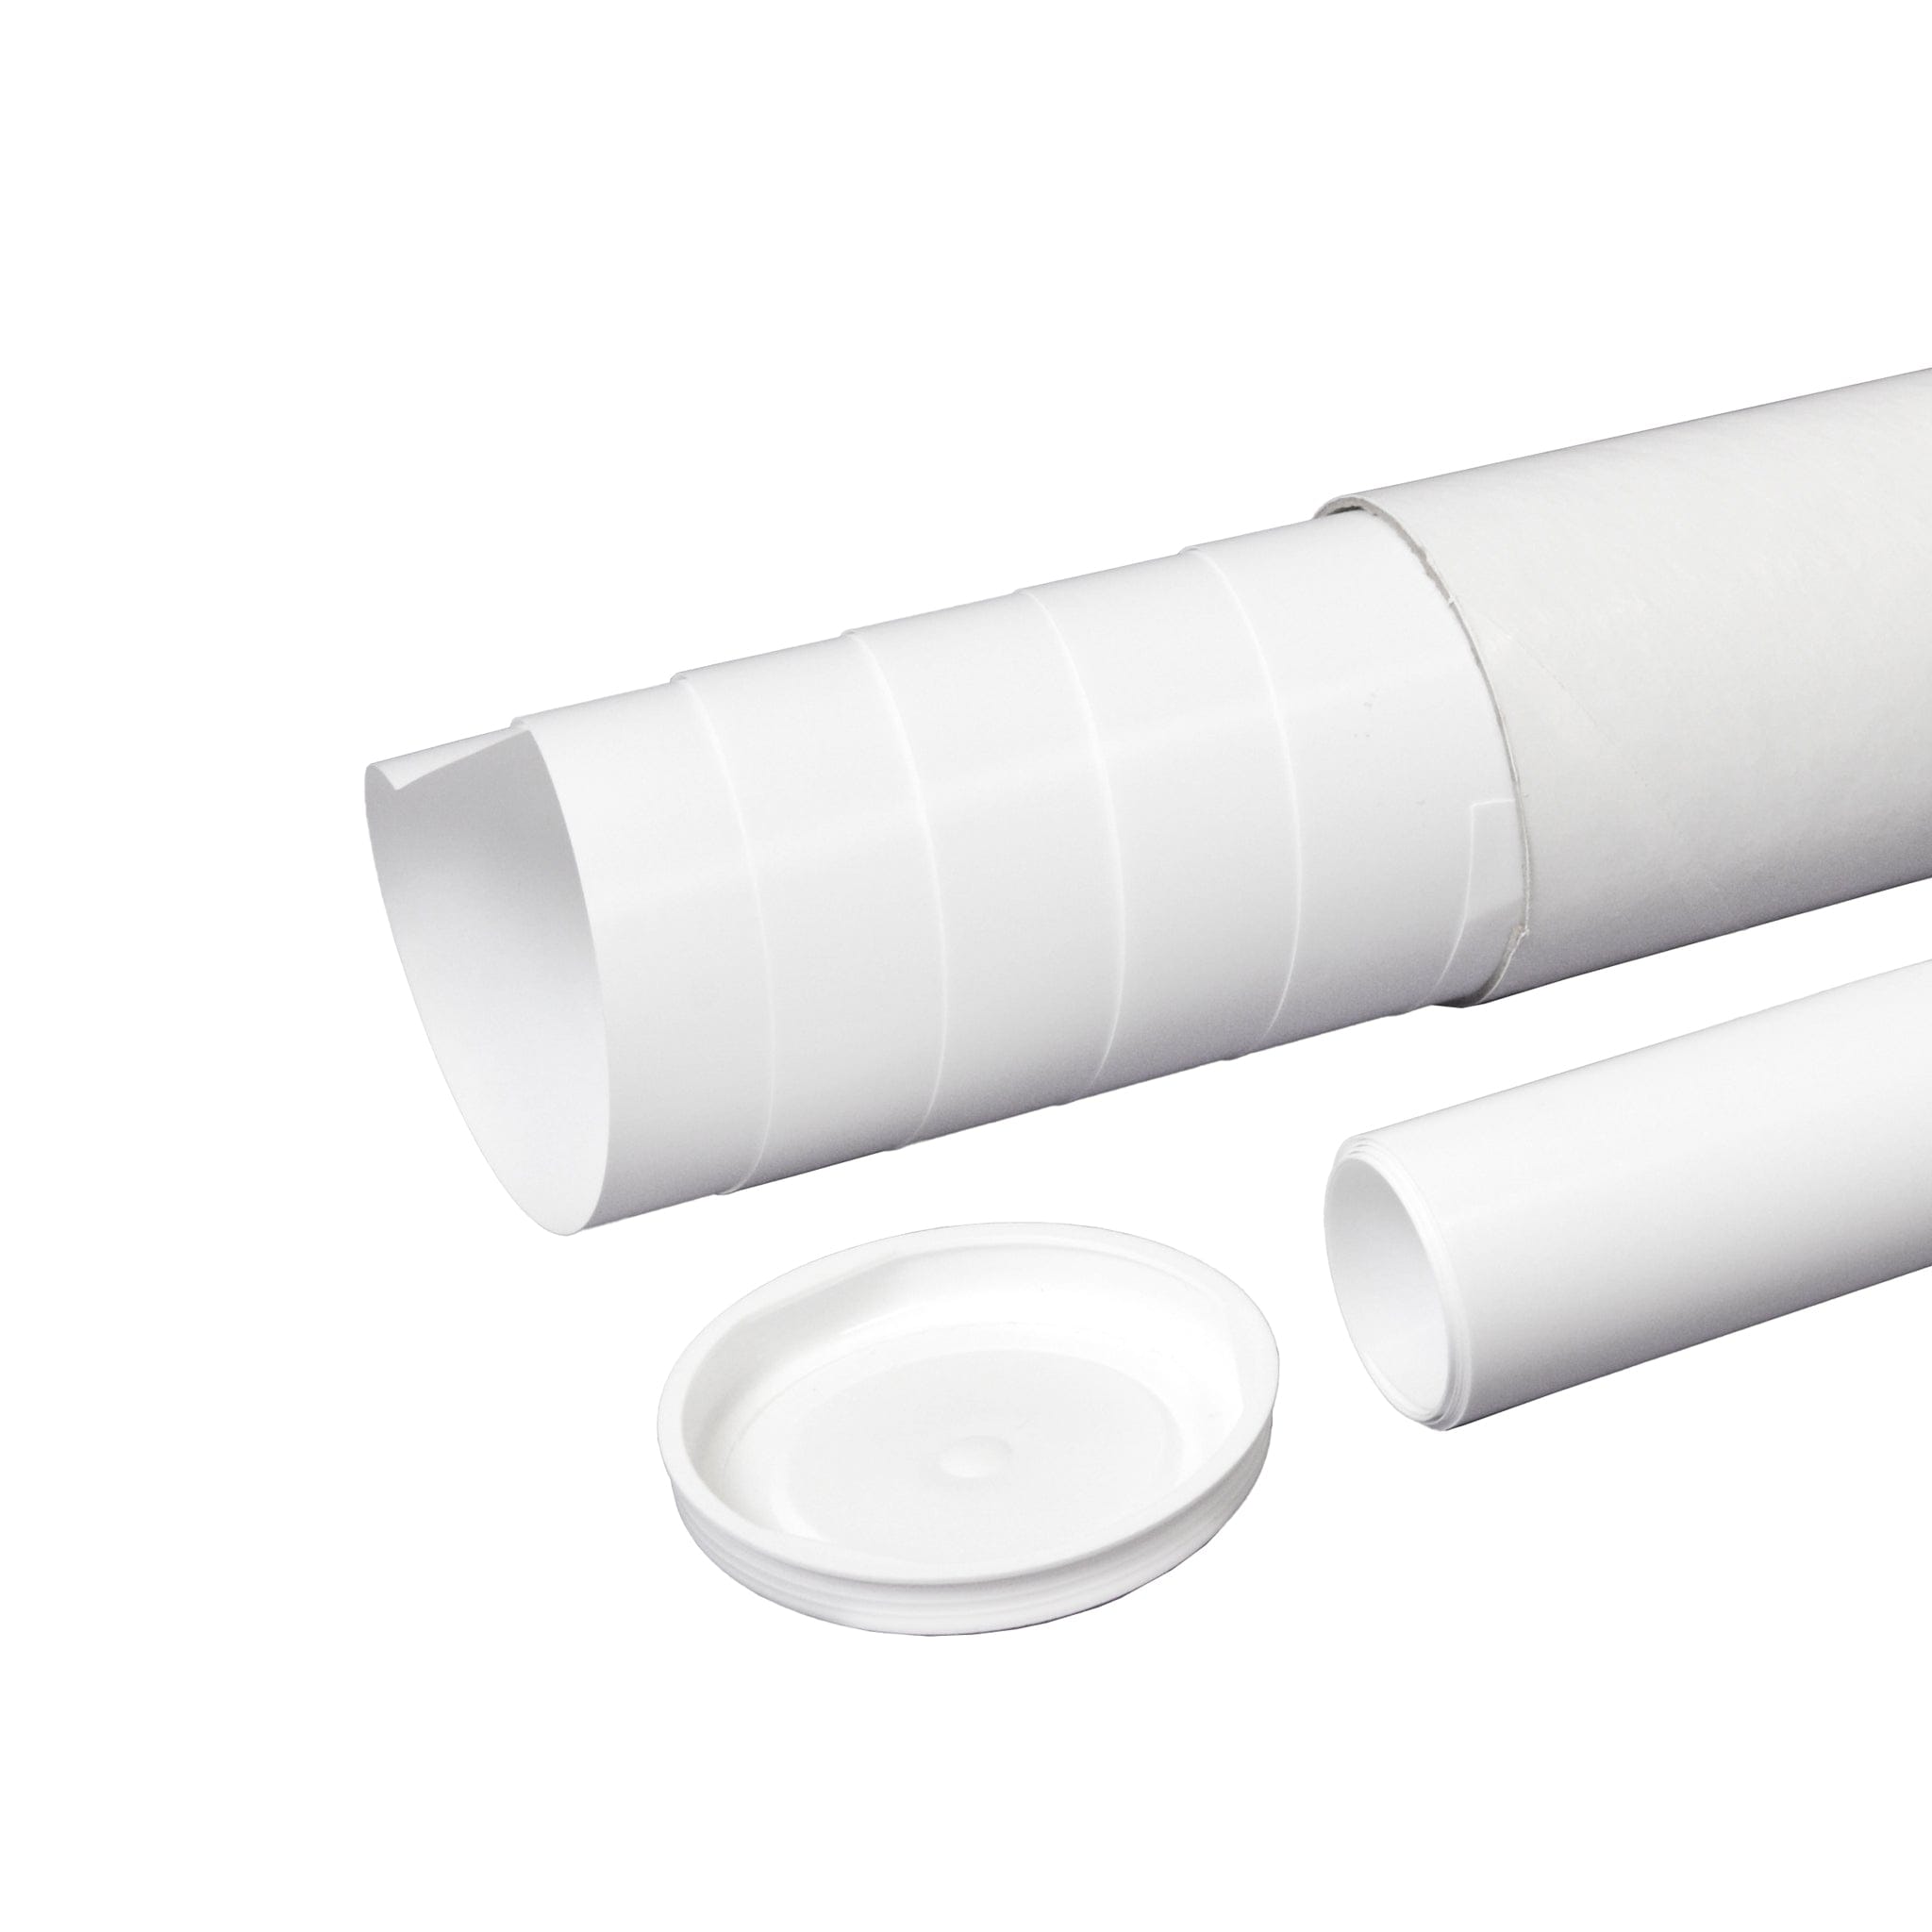 White packing tubes with document inside